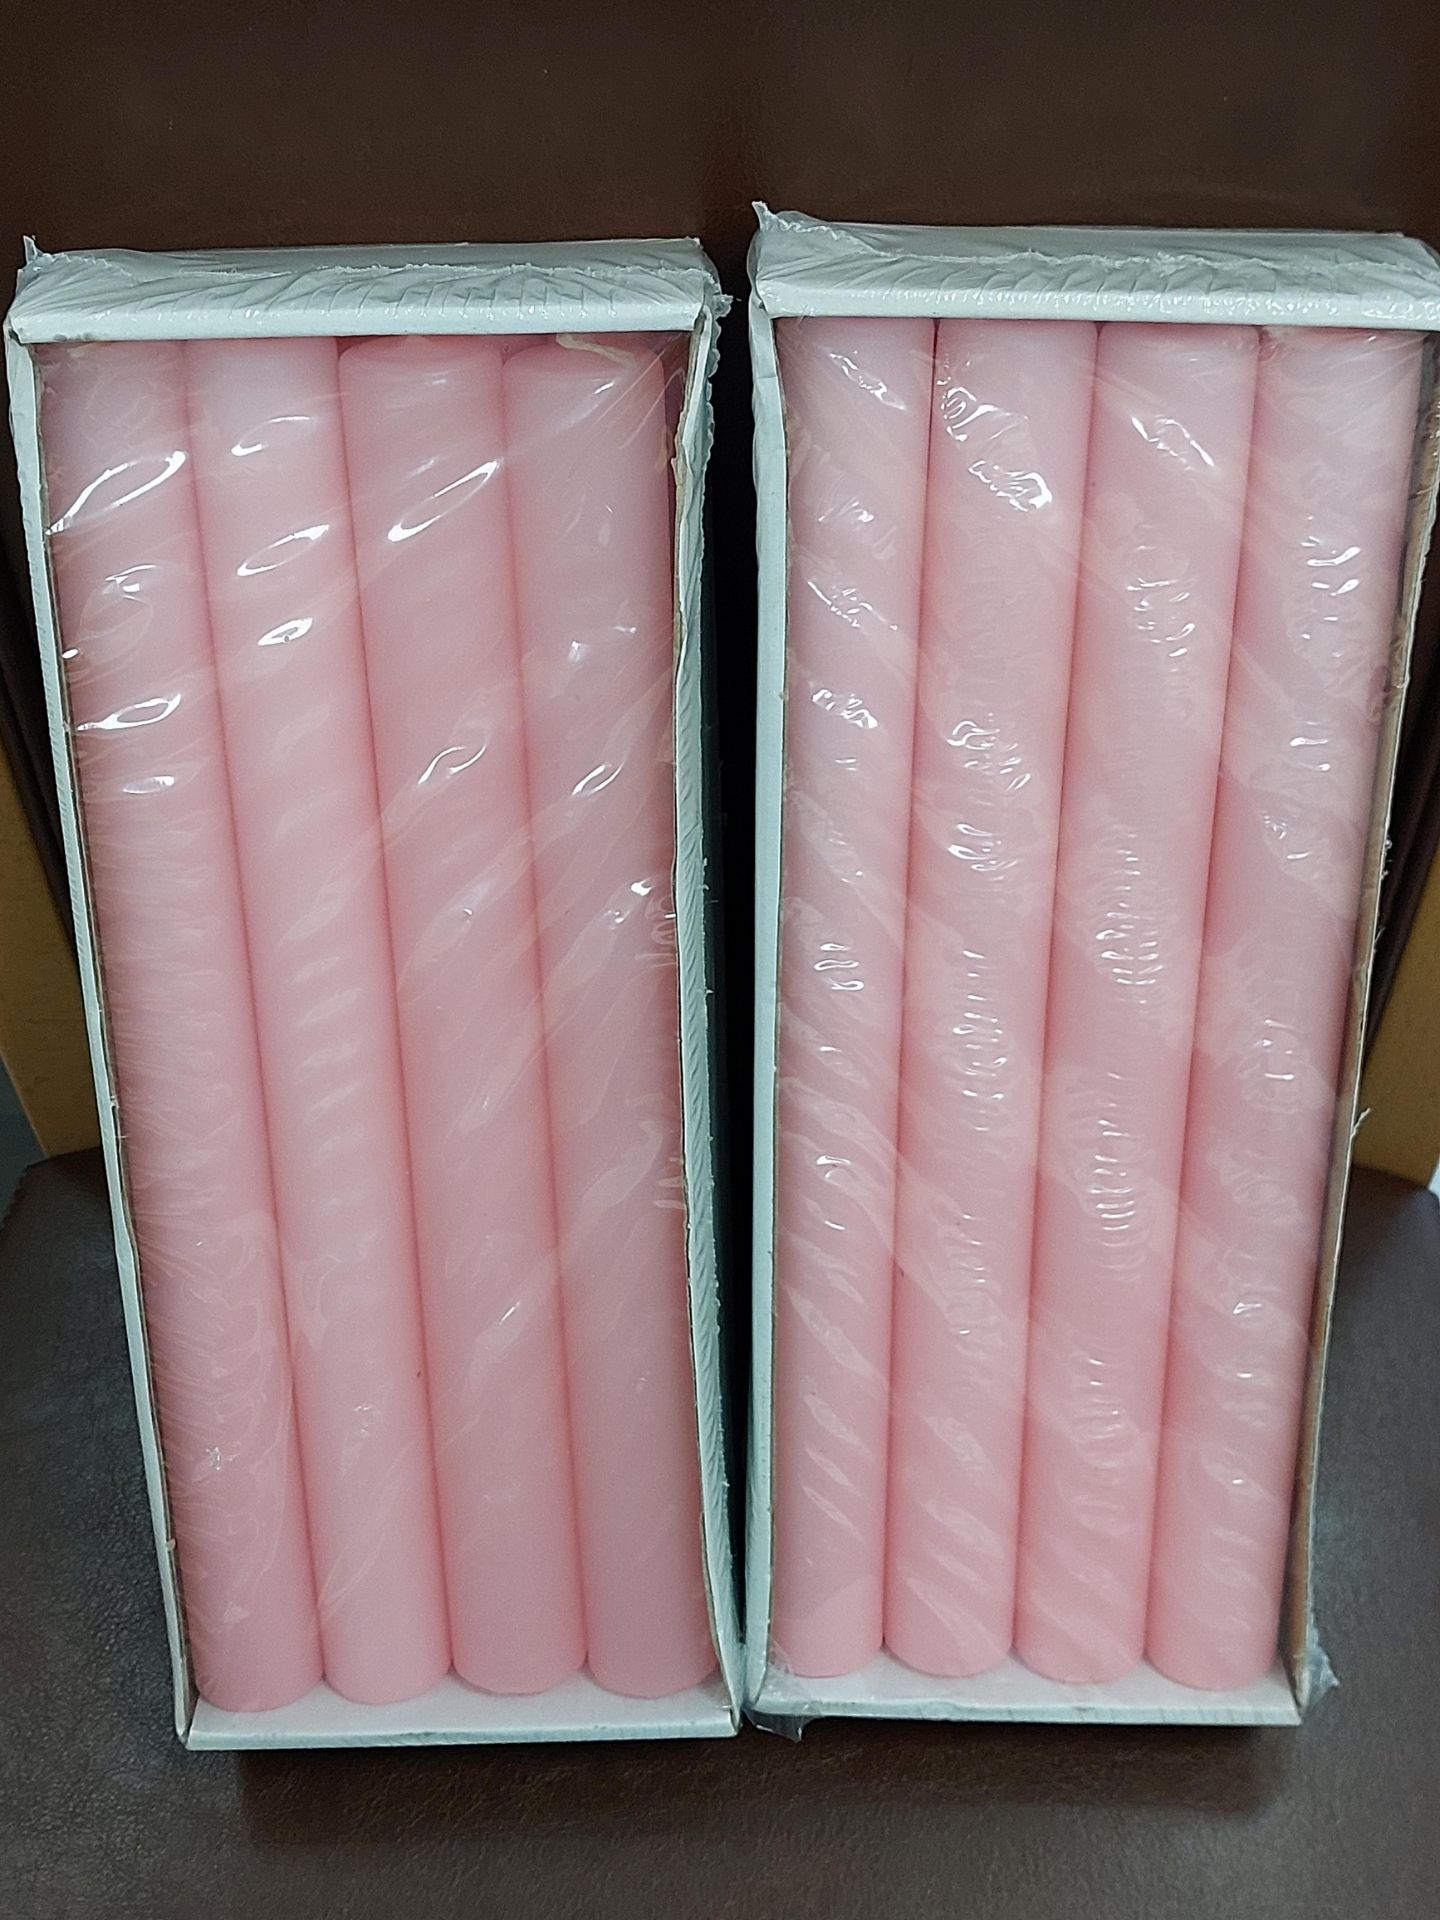 _arge pink candles 300 mm x 30 mm. 2 boxes - Image 3 of 7